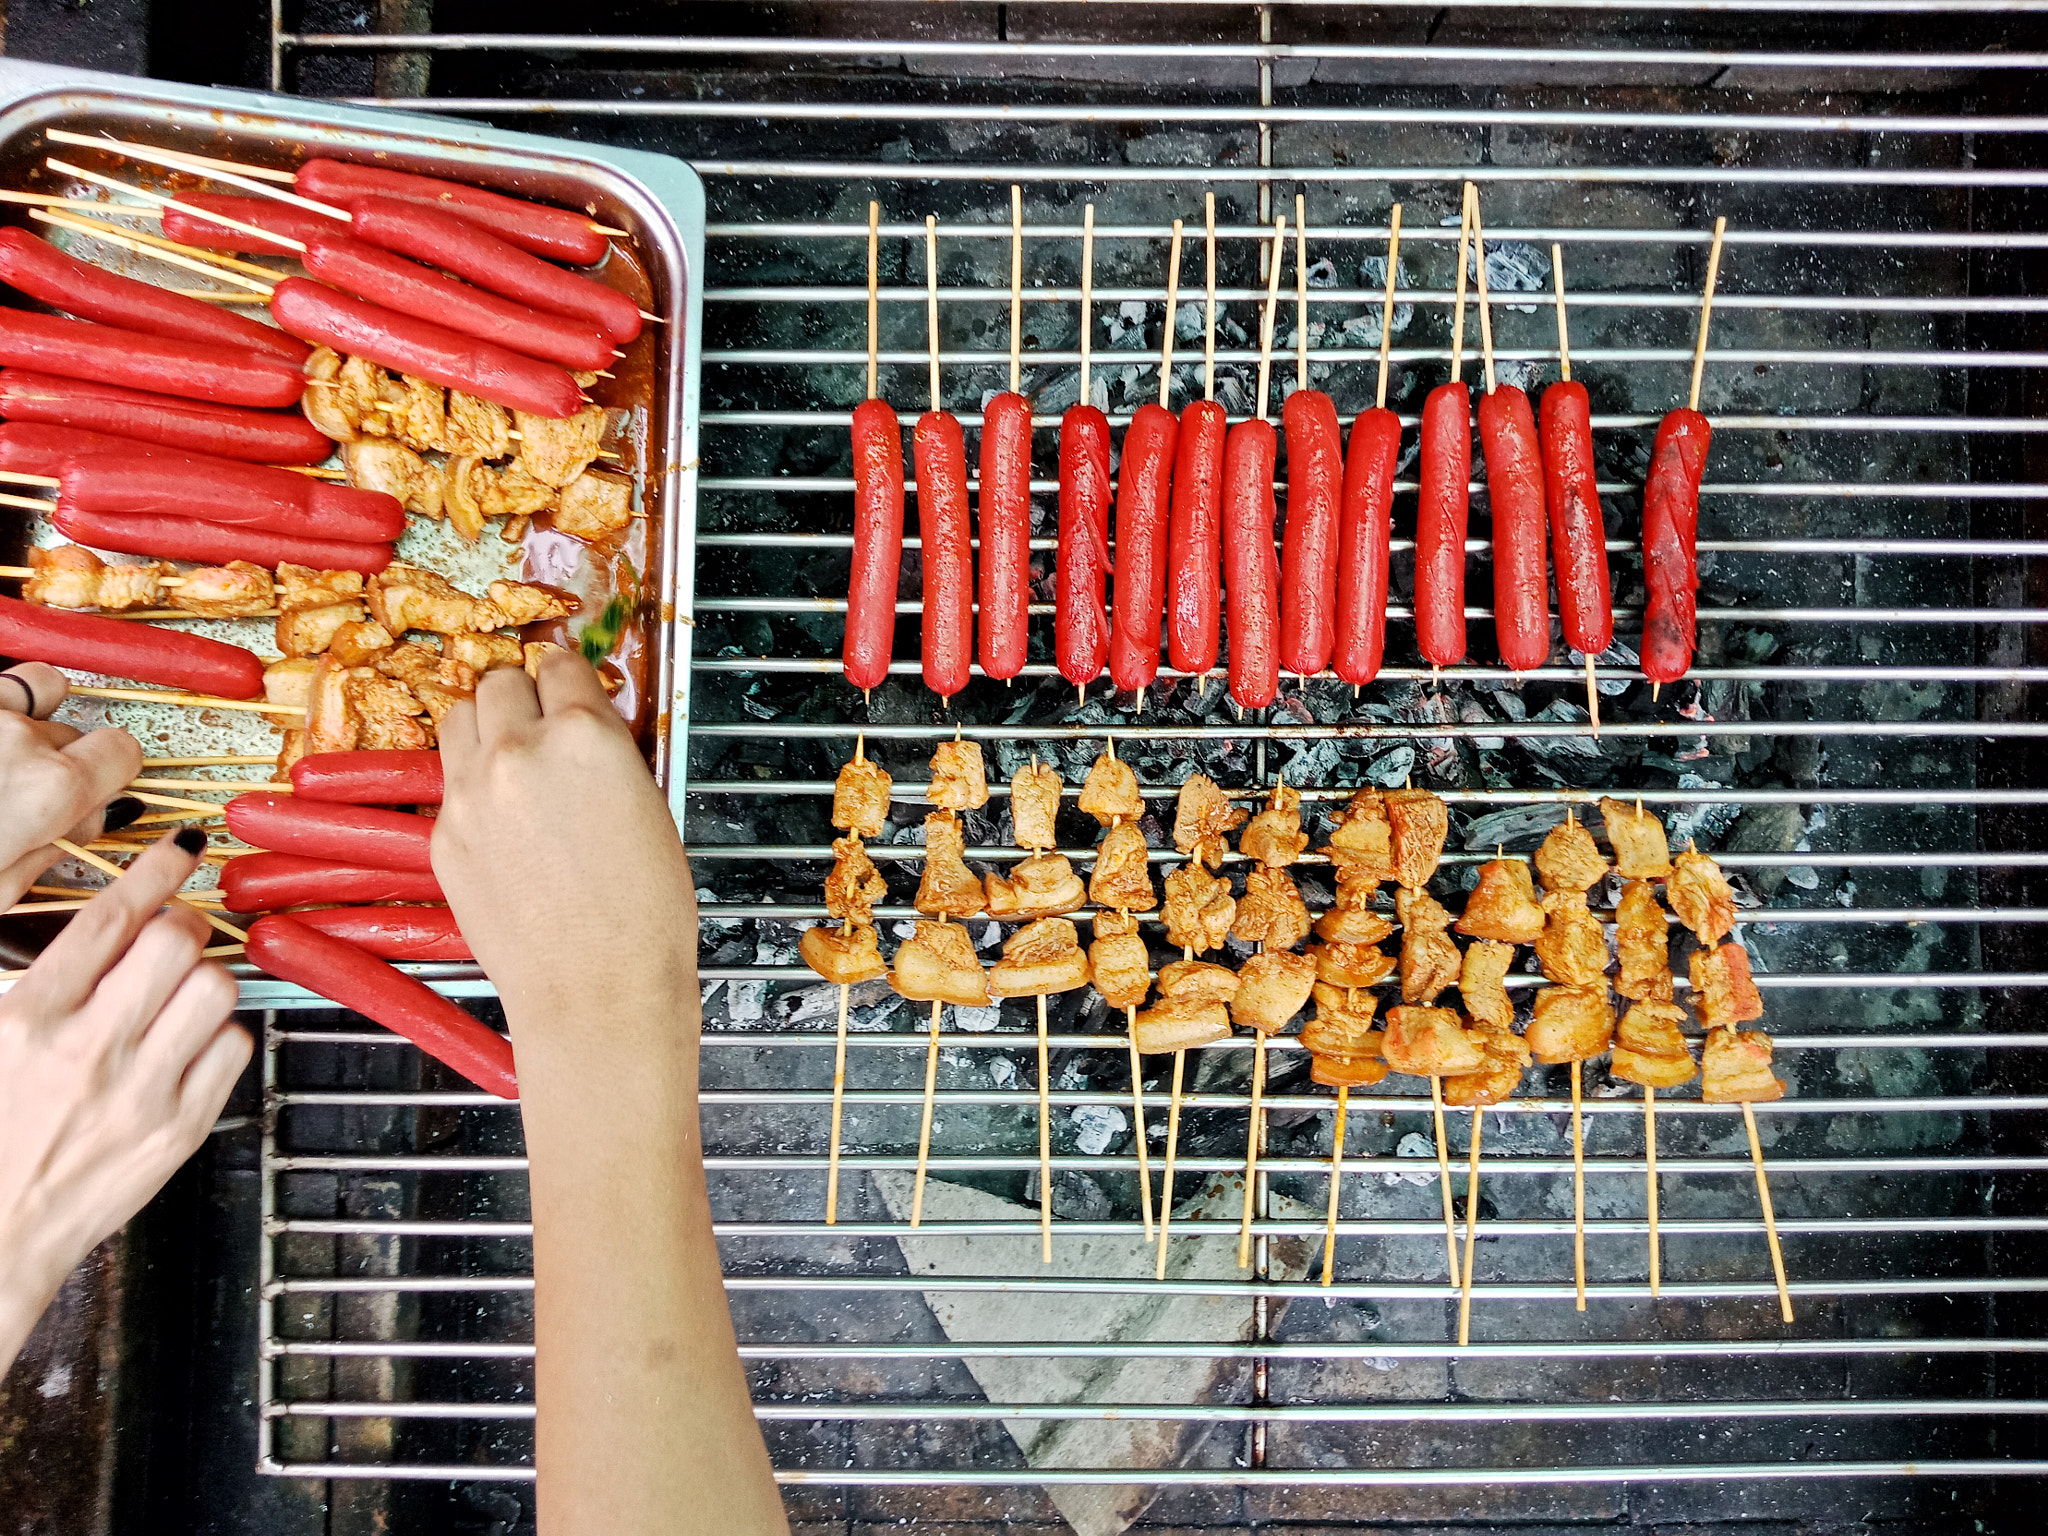 OPPO CPH1723 sample photo. Stomach growling, food grilling photography